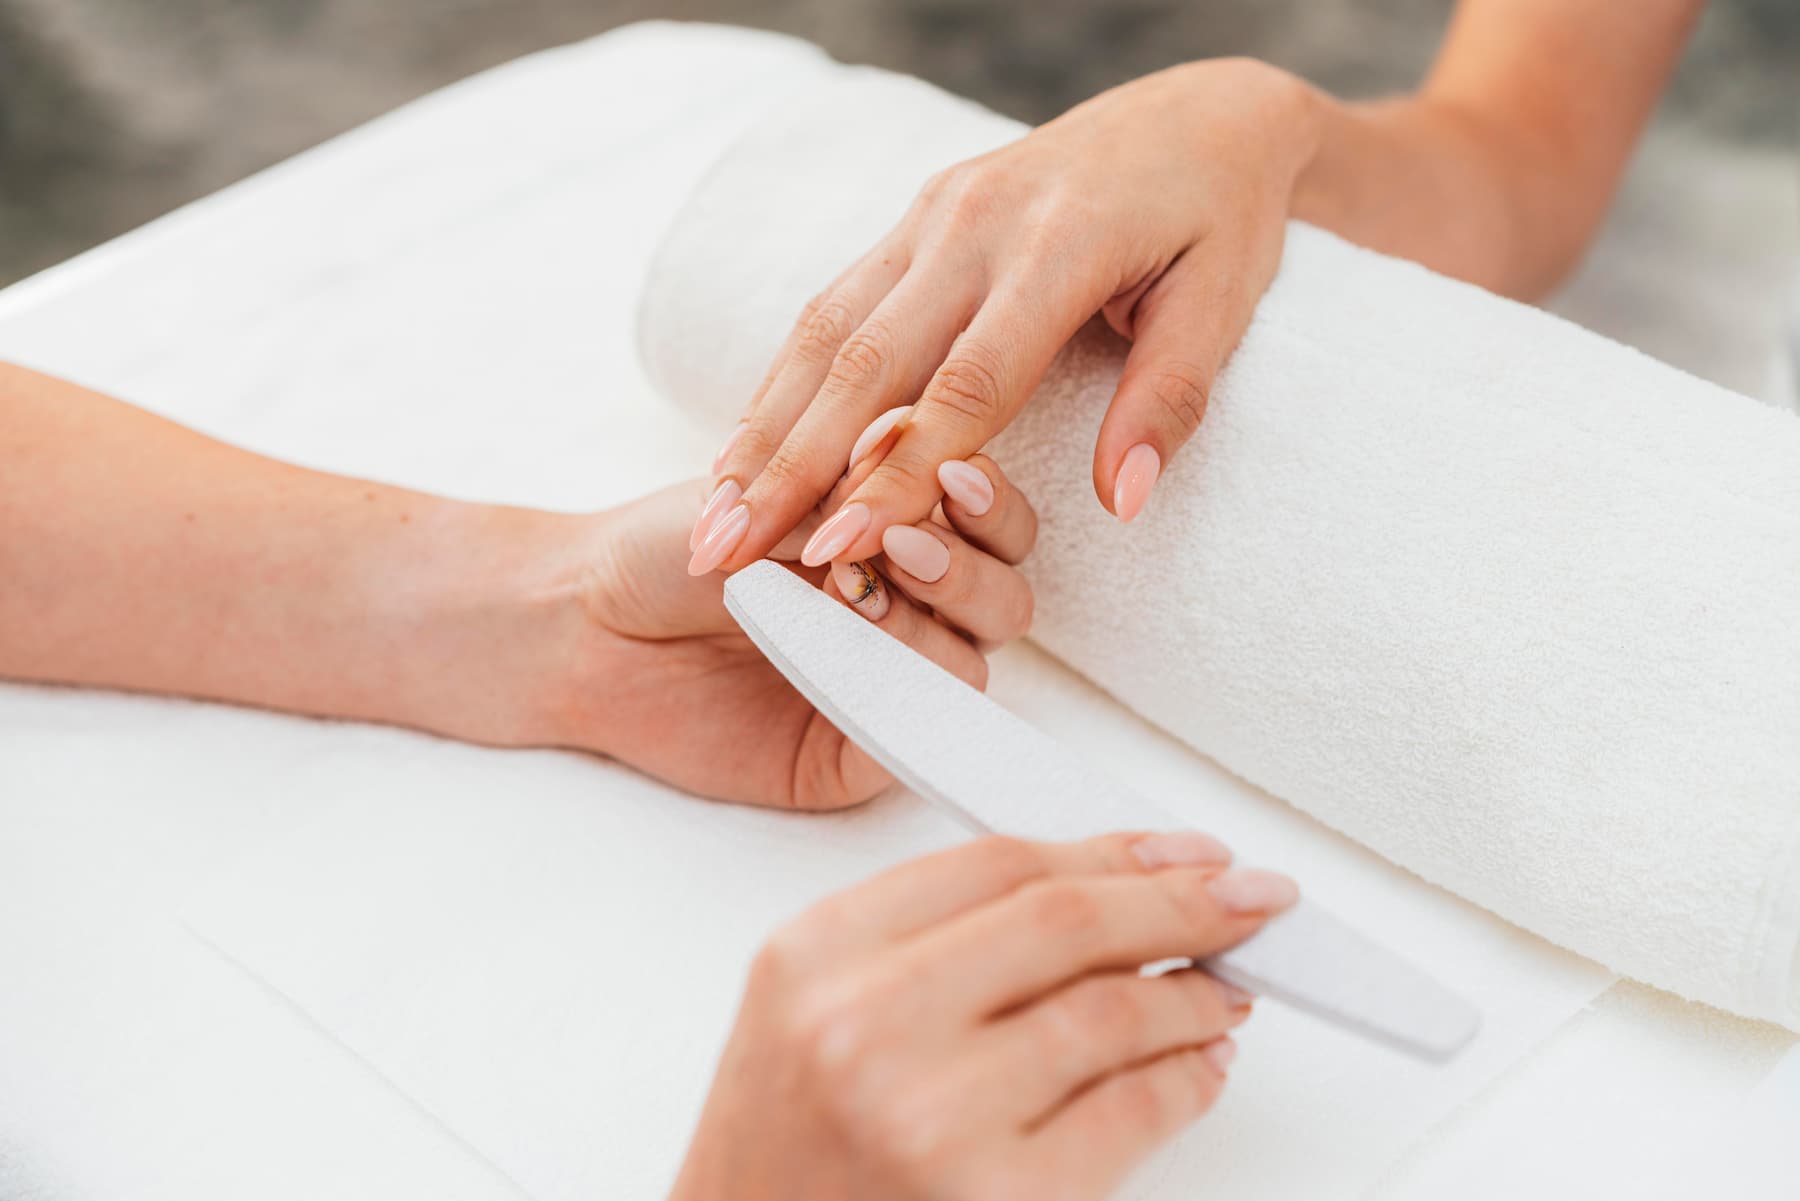 Toenail care. How to care for your nails at home